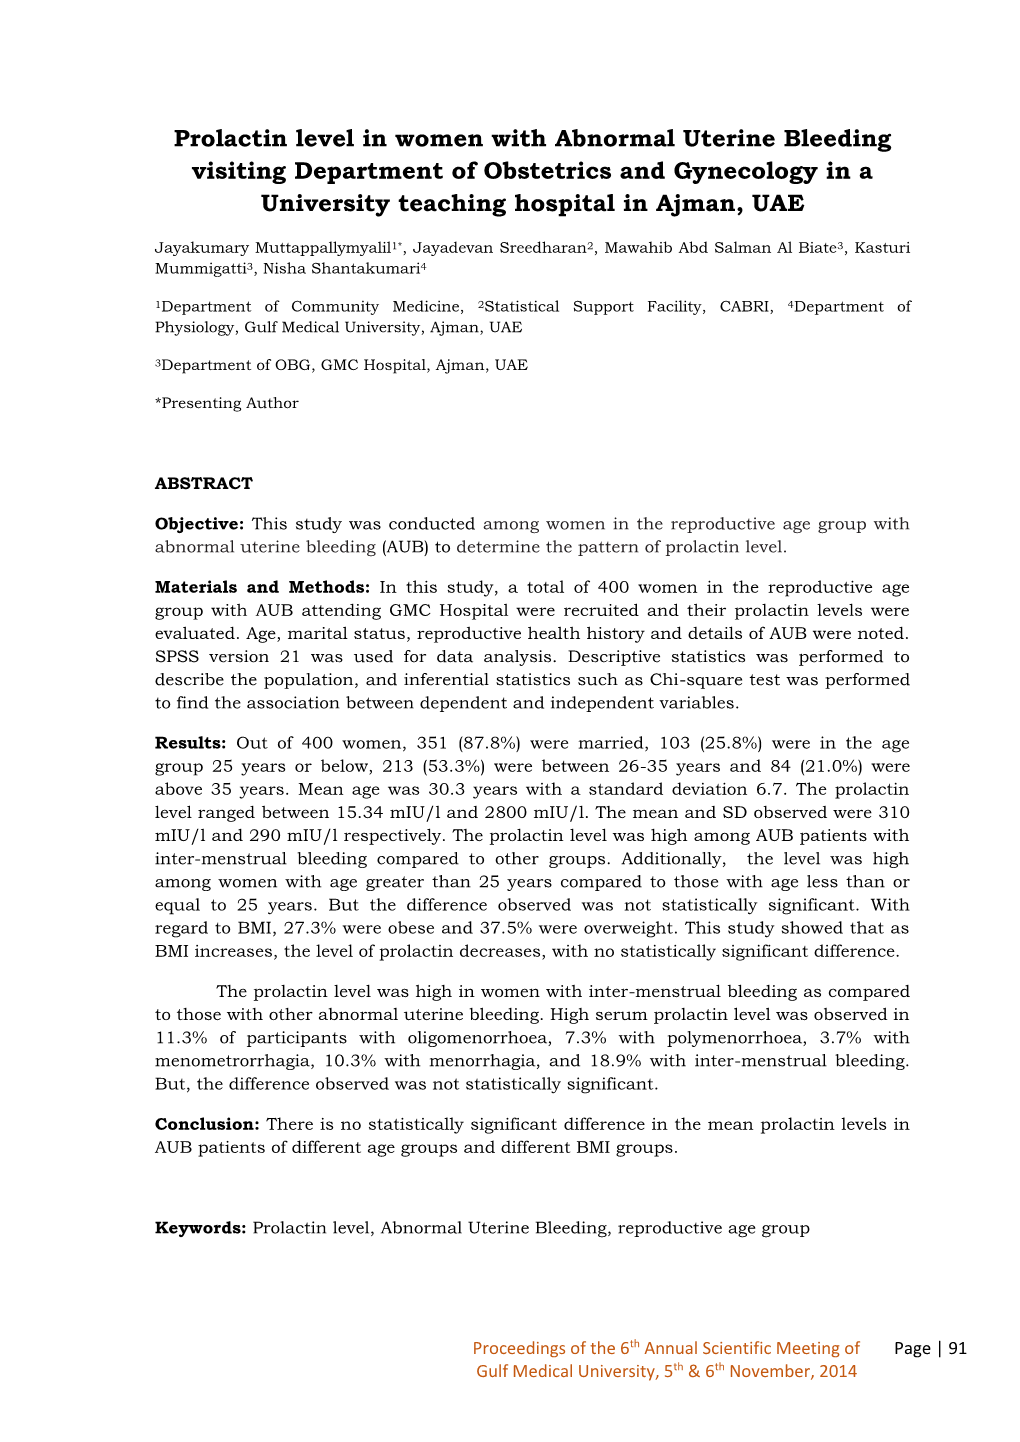 Prolactin Level in Women with Abnormal Uterine Bleeding Visiting Department of Obstetrics and Gynecology in a University Teaching Hospital in Ajman, UAE